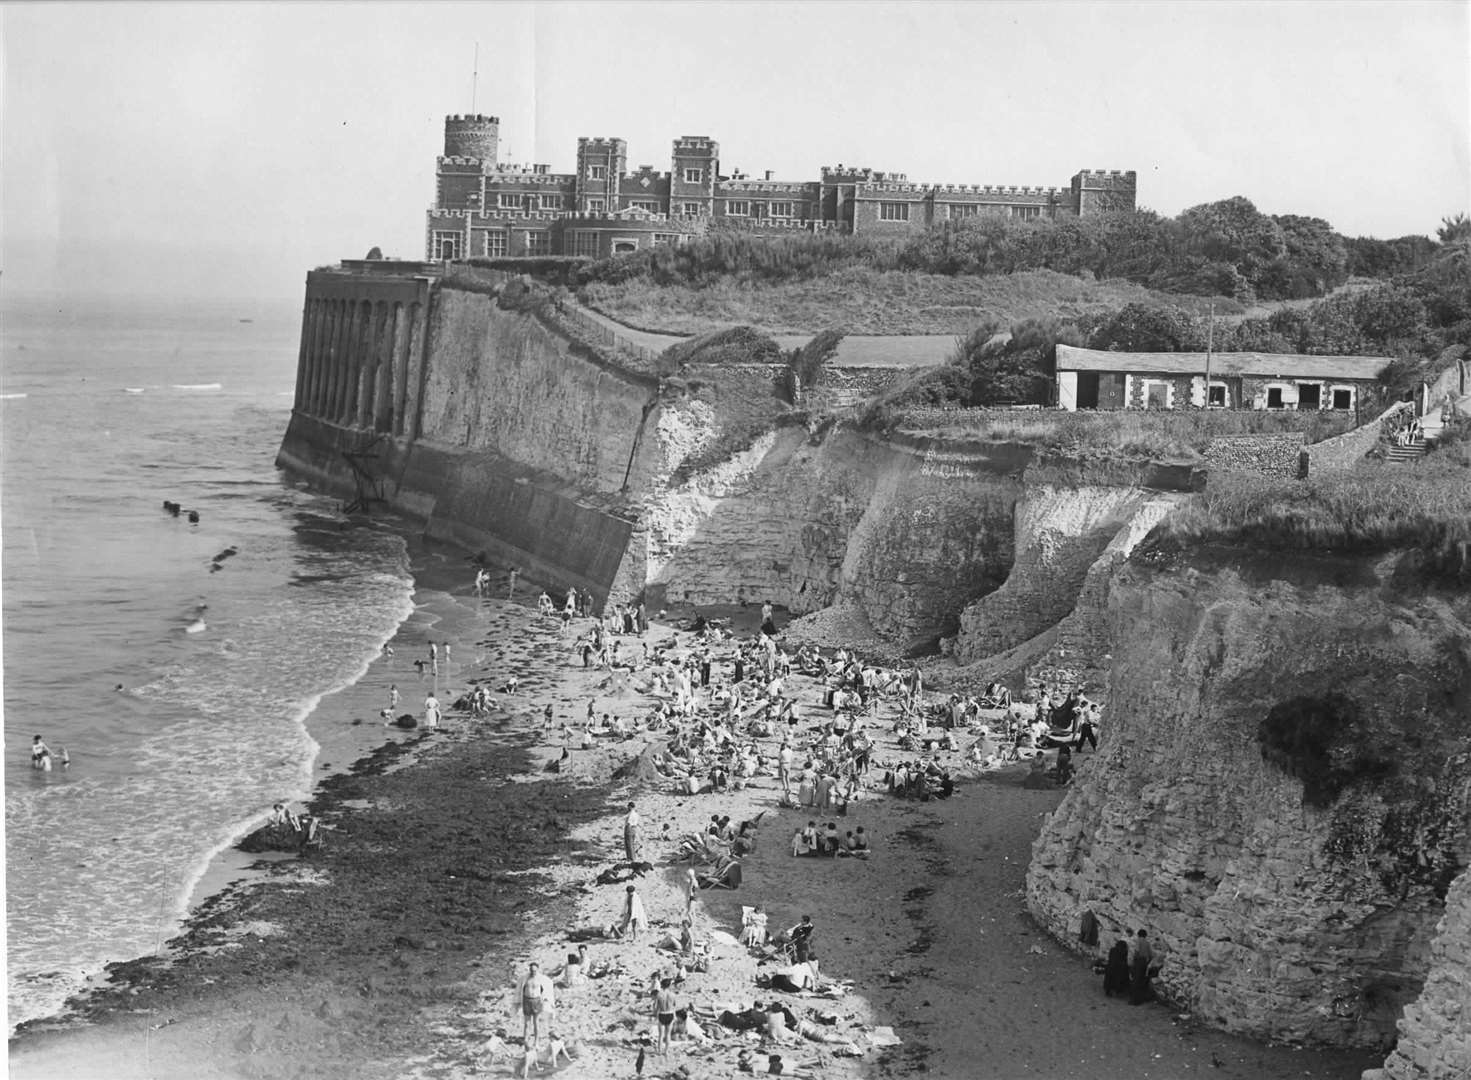 Kingsgate Castle and beach, near Cliftonville, in August 1953